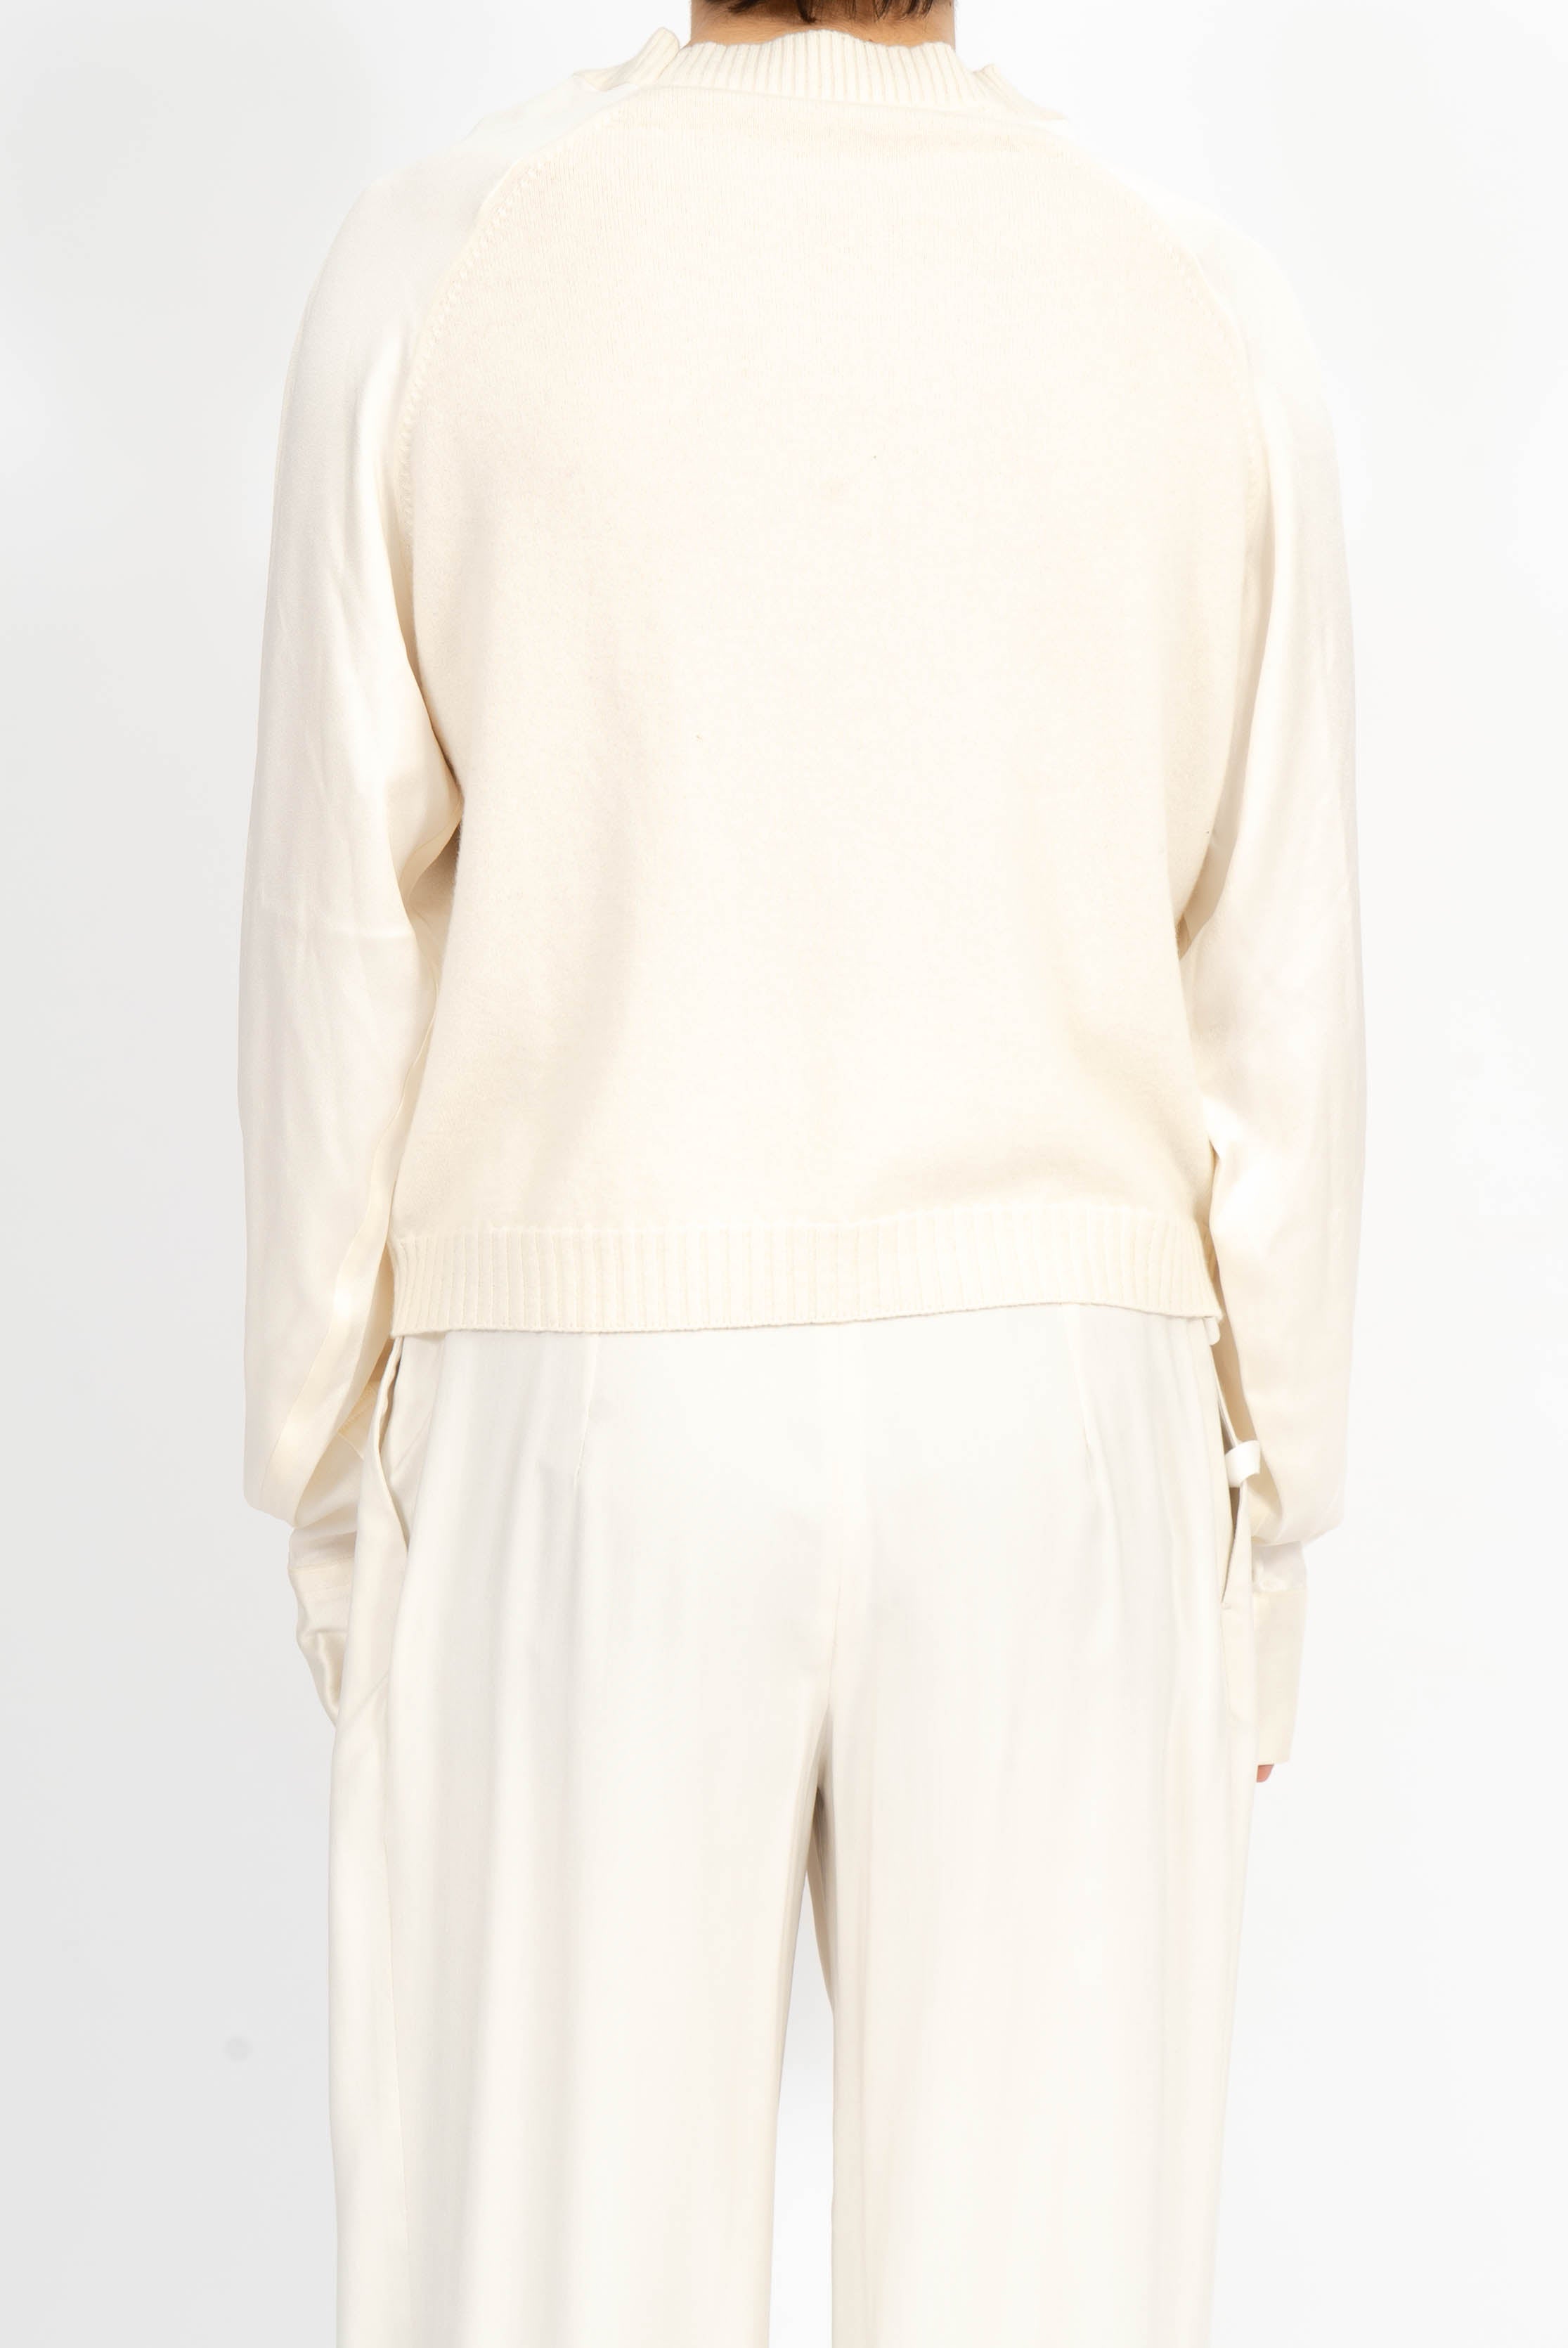 SS18 Knit with Satin Sleeves Ivory